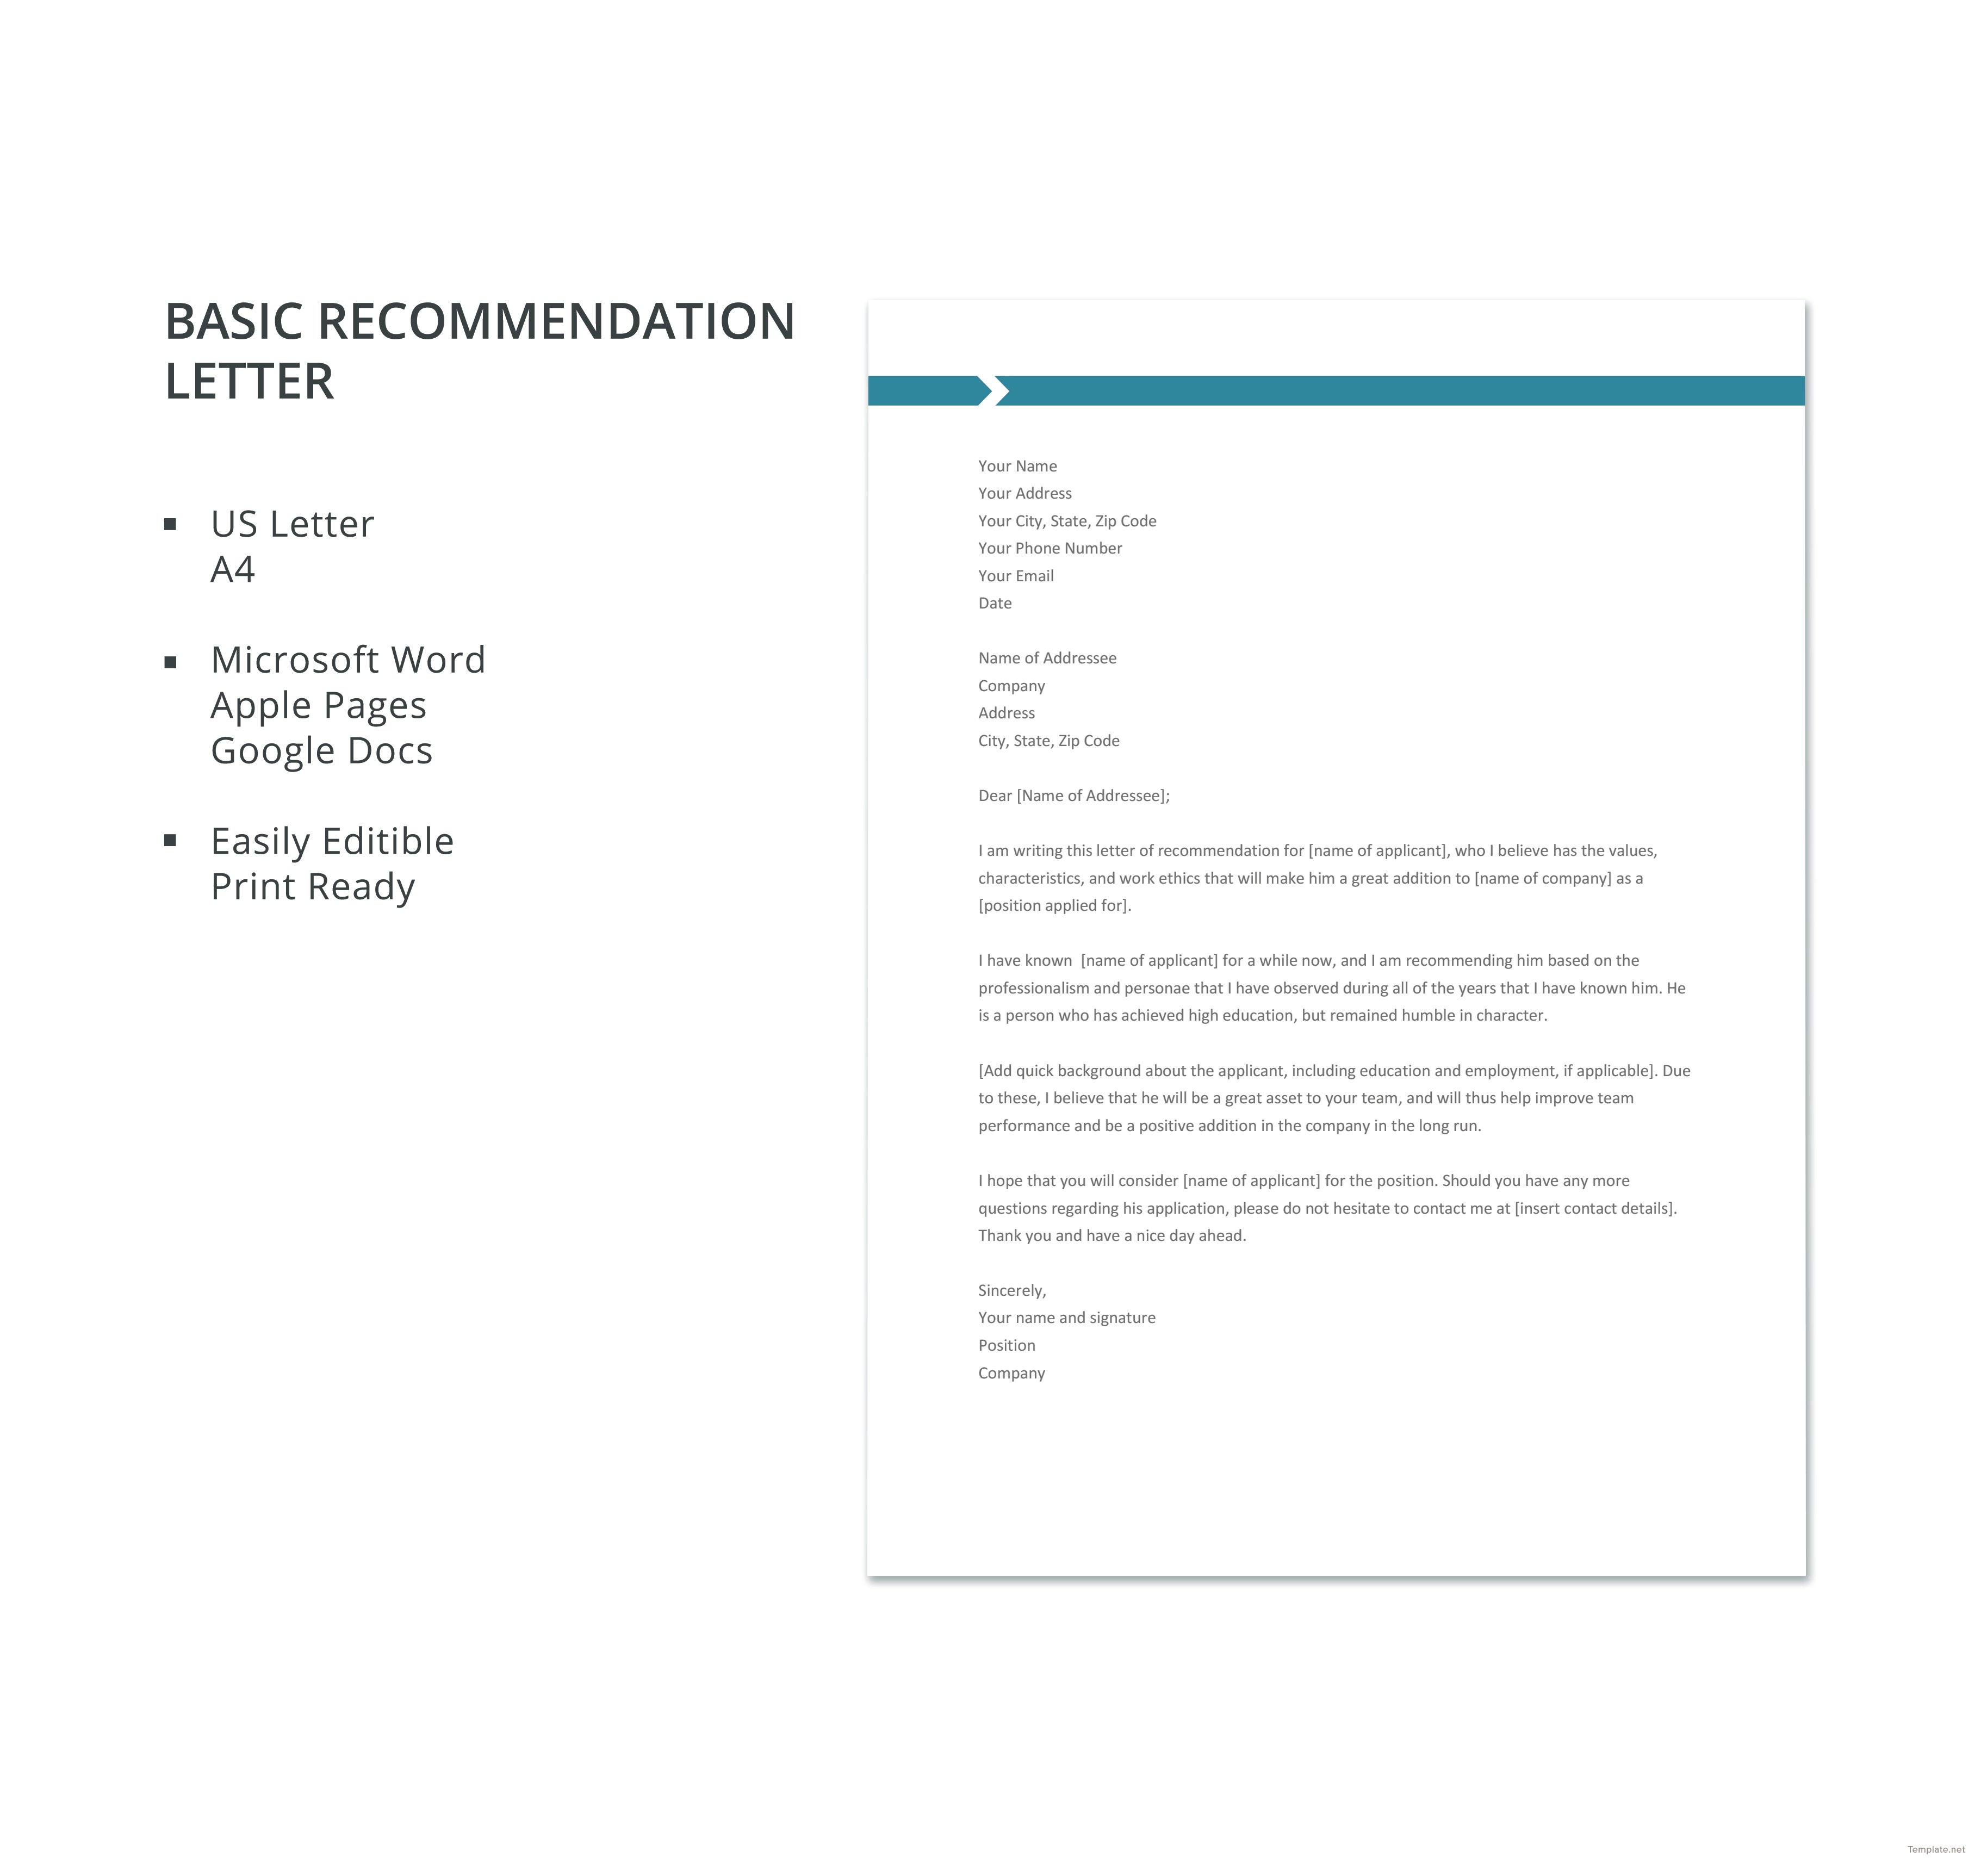 Basic Letter Template In Microsoft Word, Apple Pages